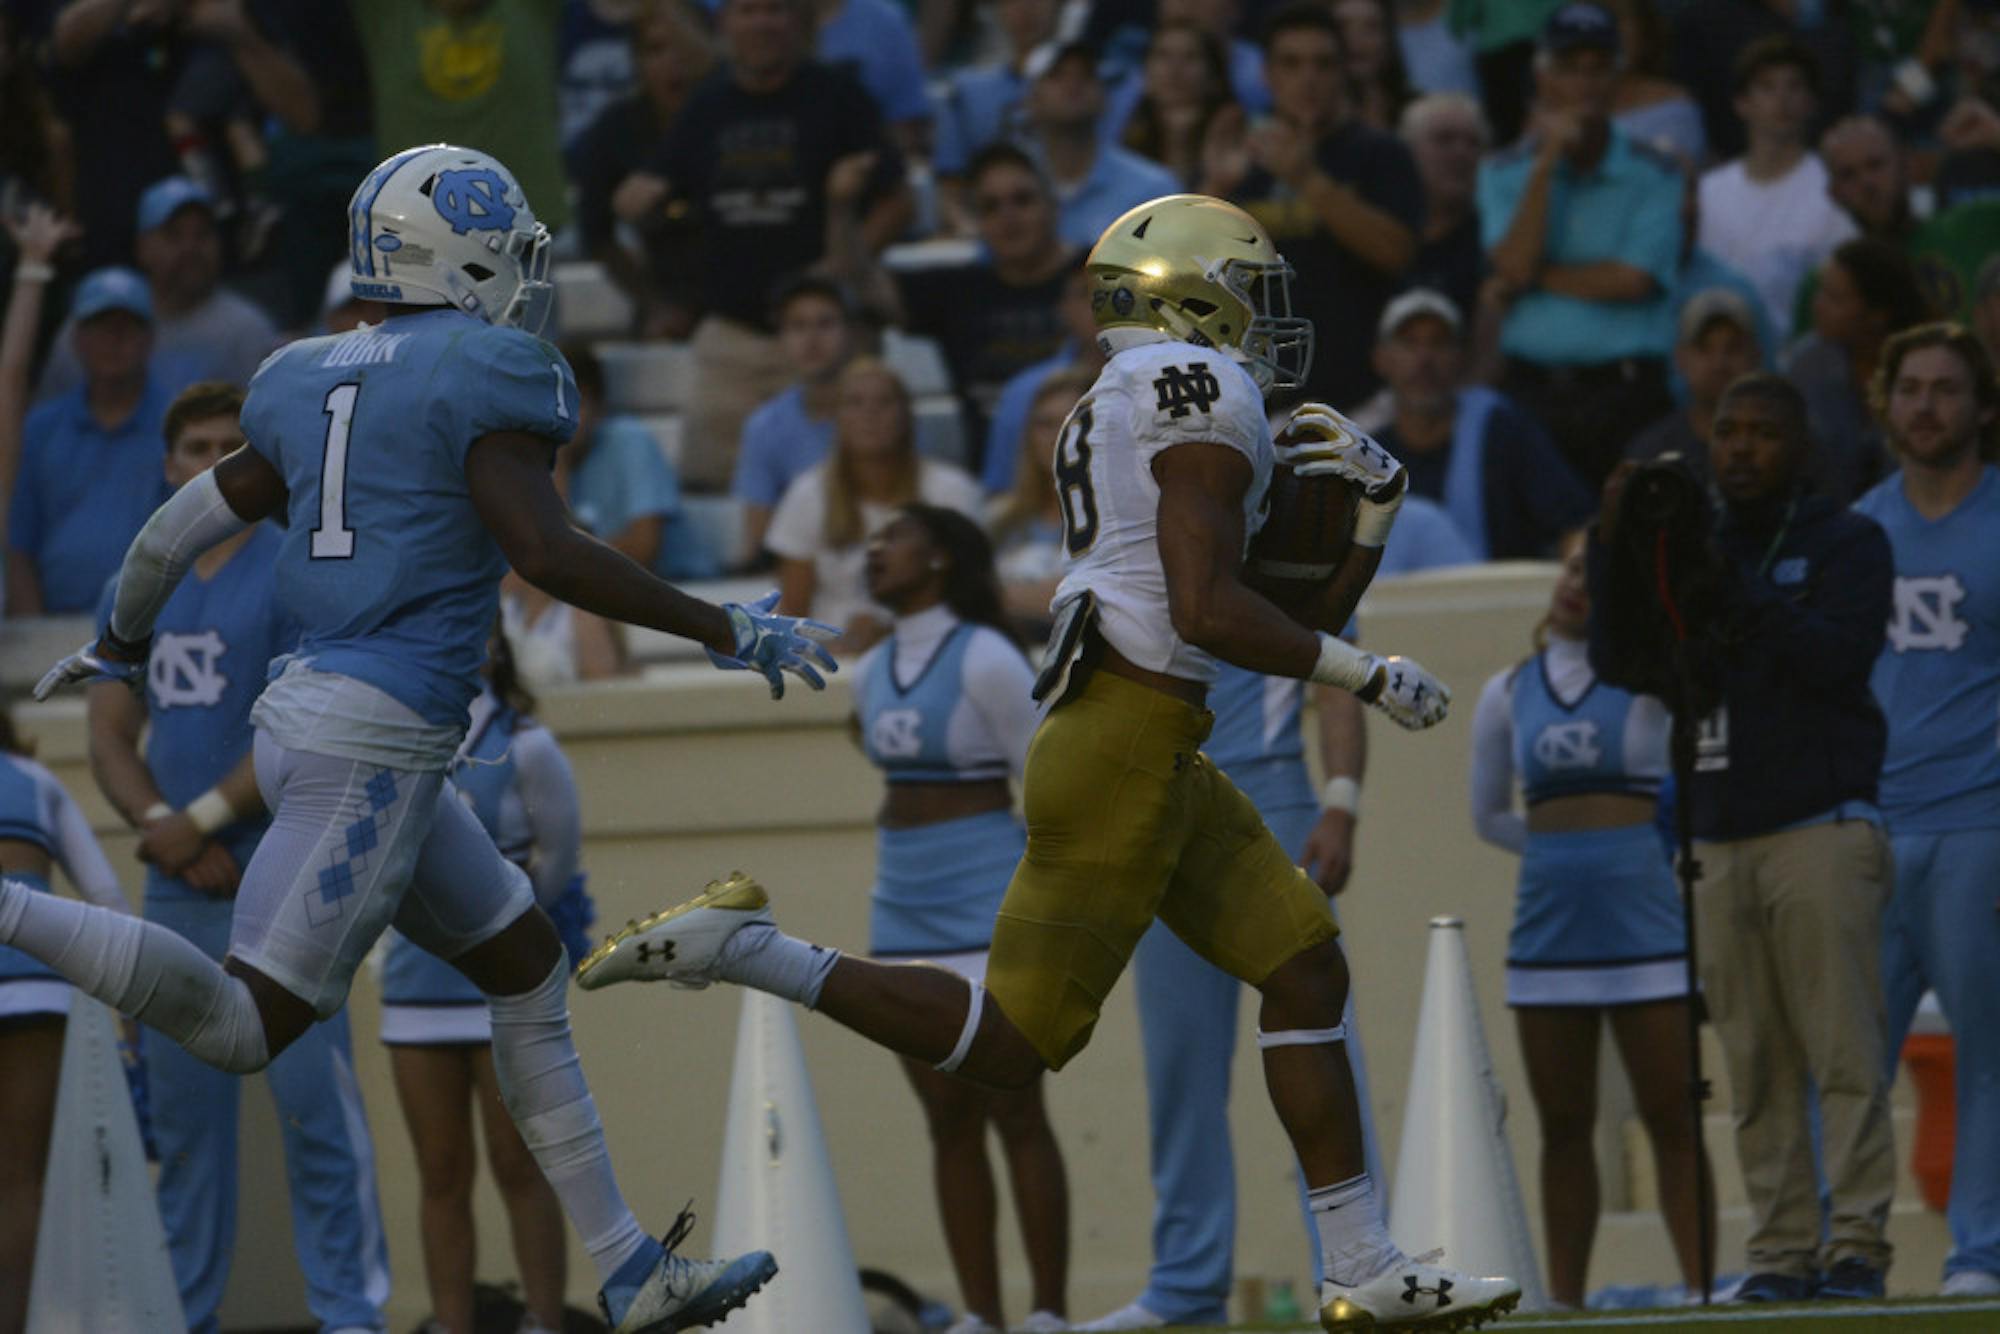 Irish sophomore running back Deon McIntosh outpaces a defender during Notre Dame's 33-10 win over North Carolina on Saturday at Kenan Memorial Stadium in Chapel Hill, North Carolina.